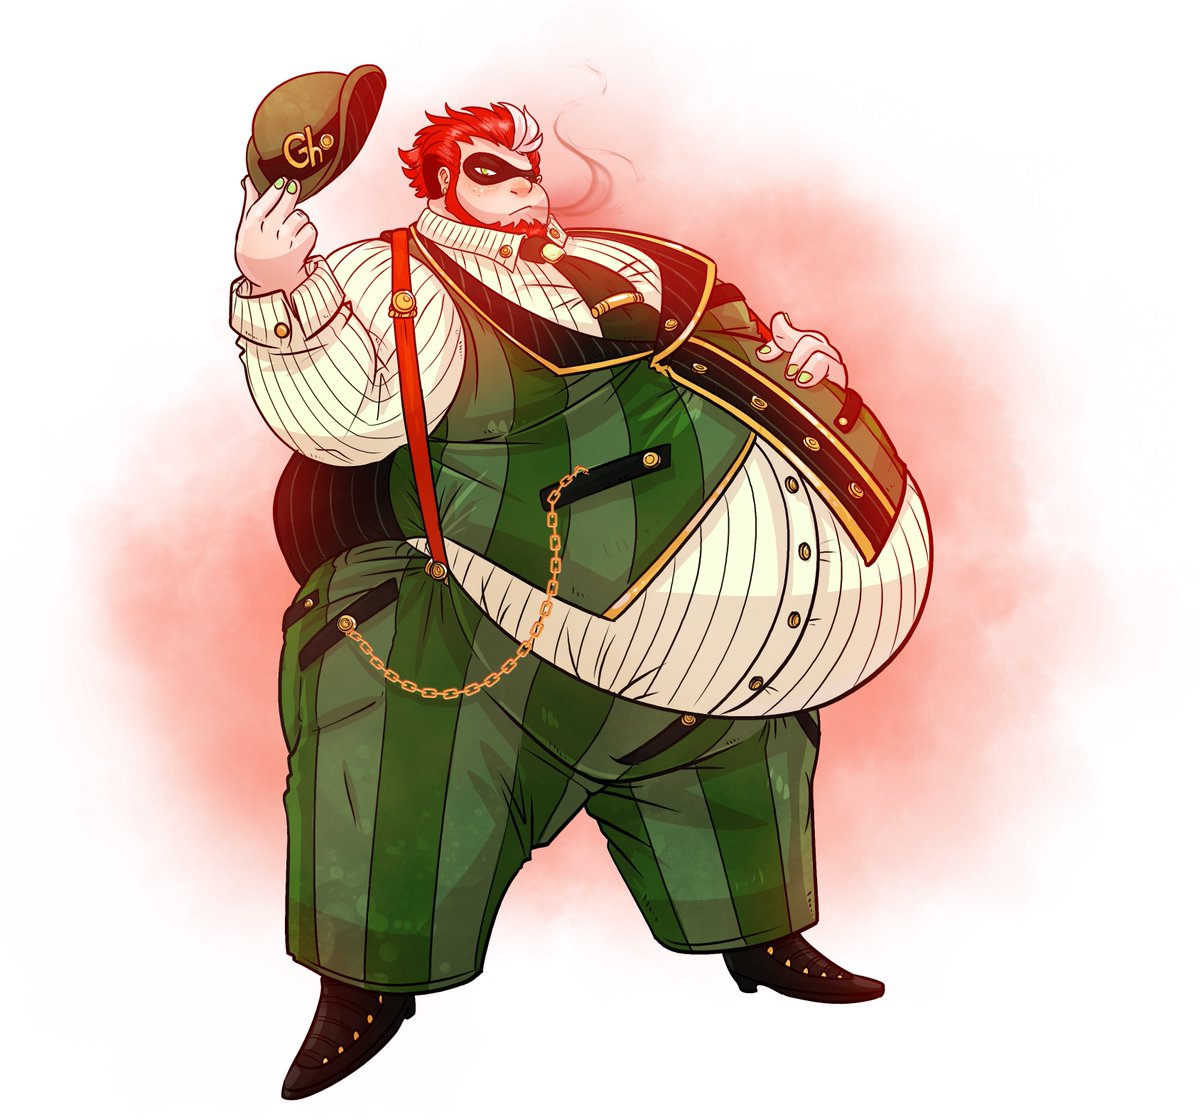 Scalebreaker Jack - A super-villain character of mine! Jack is slowly bending the world to his whim. Fattening up society and letting them hang off his every word. The red mist he produces makes people more susceptible to his charms and act as a calorific amplifier.